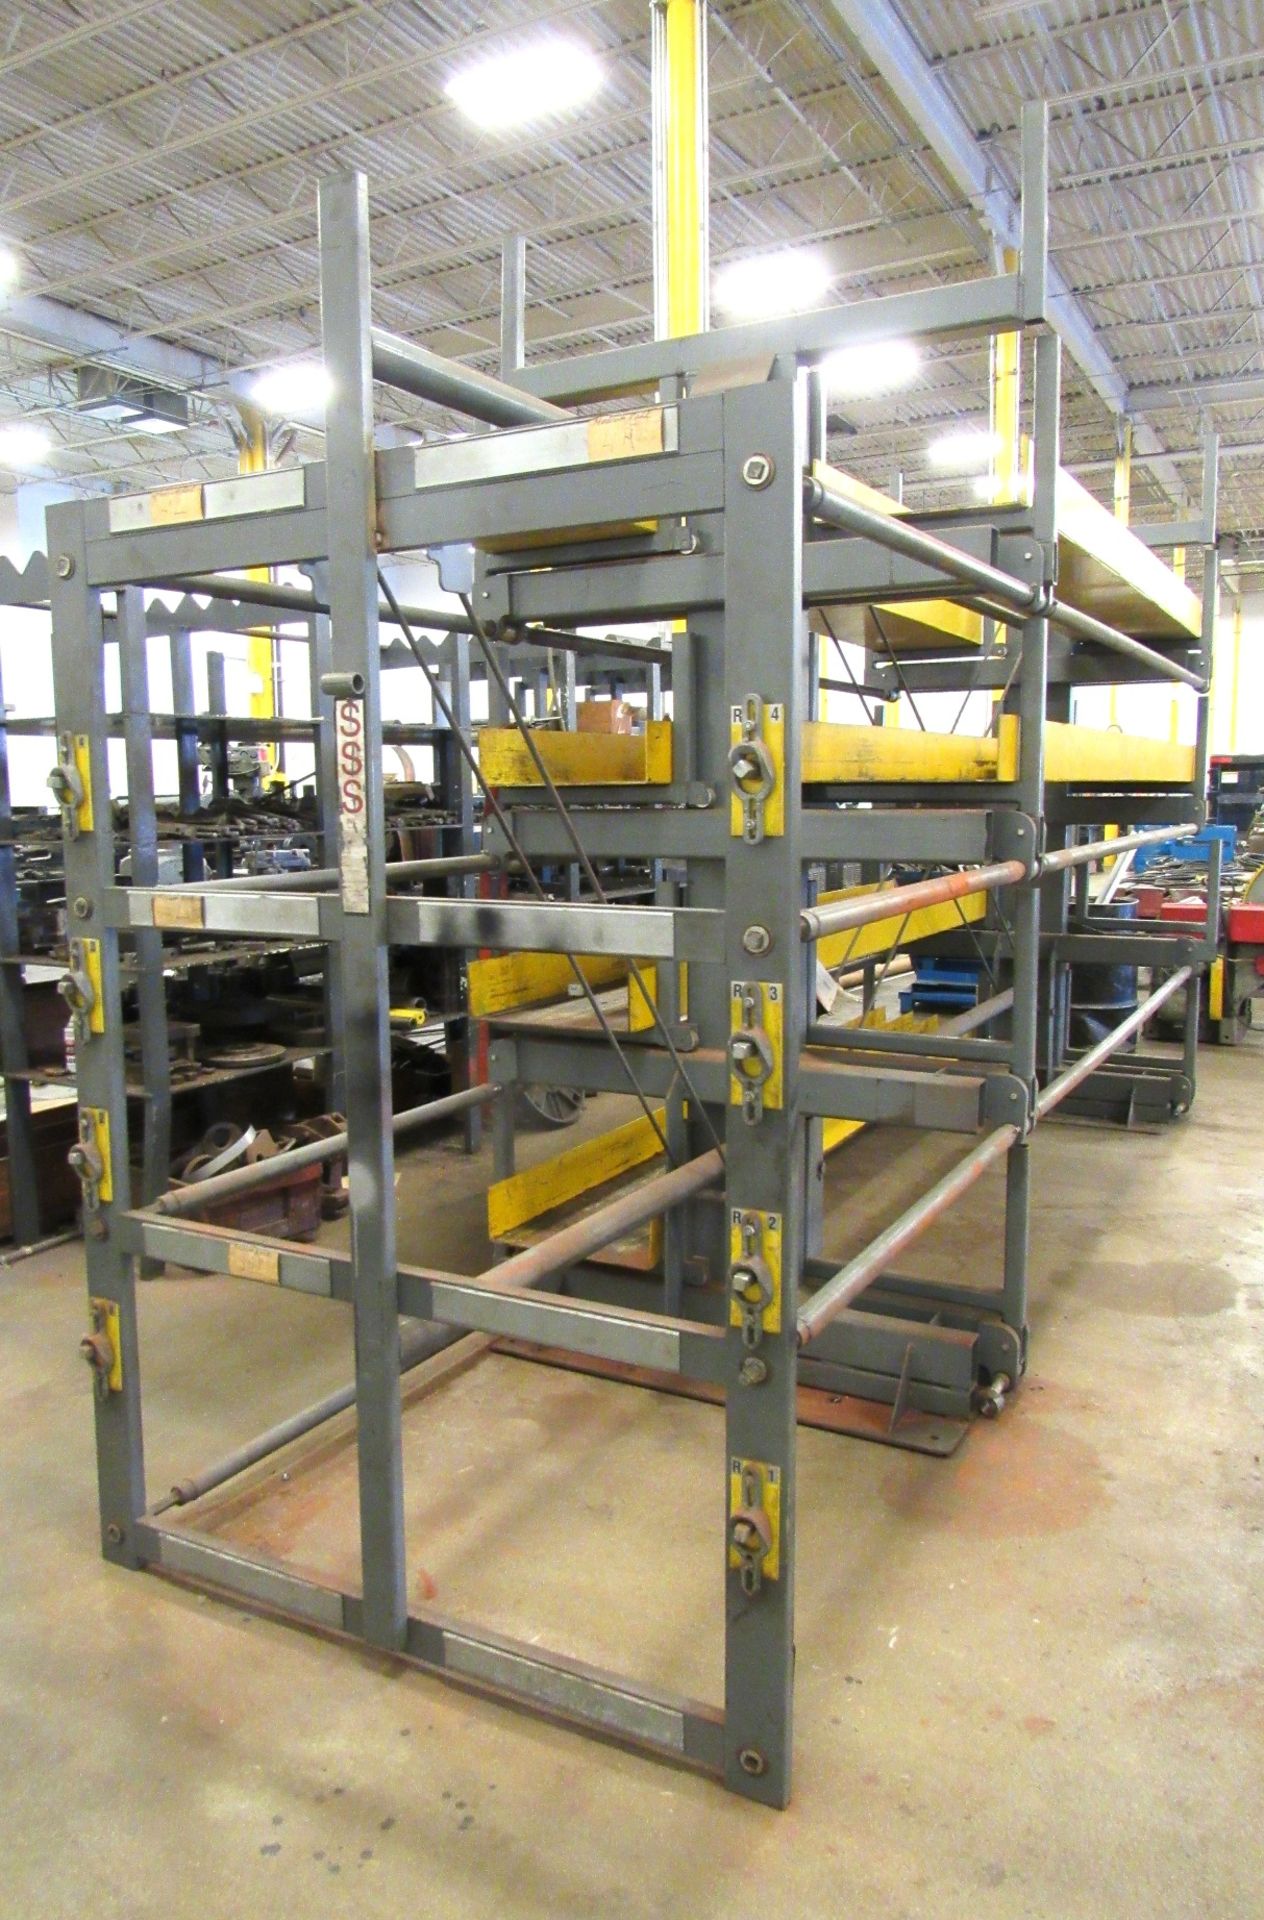 Steel Storage Sytems Mod. 4T-2G-20 x 15R-2 Articulating Material Storage Rack - Image 4 of 5